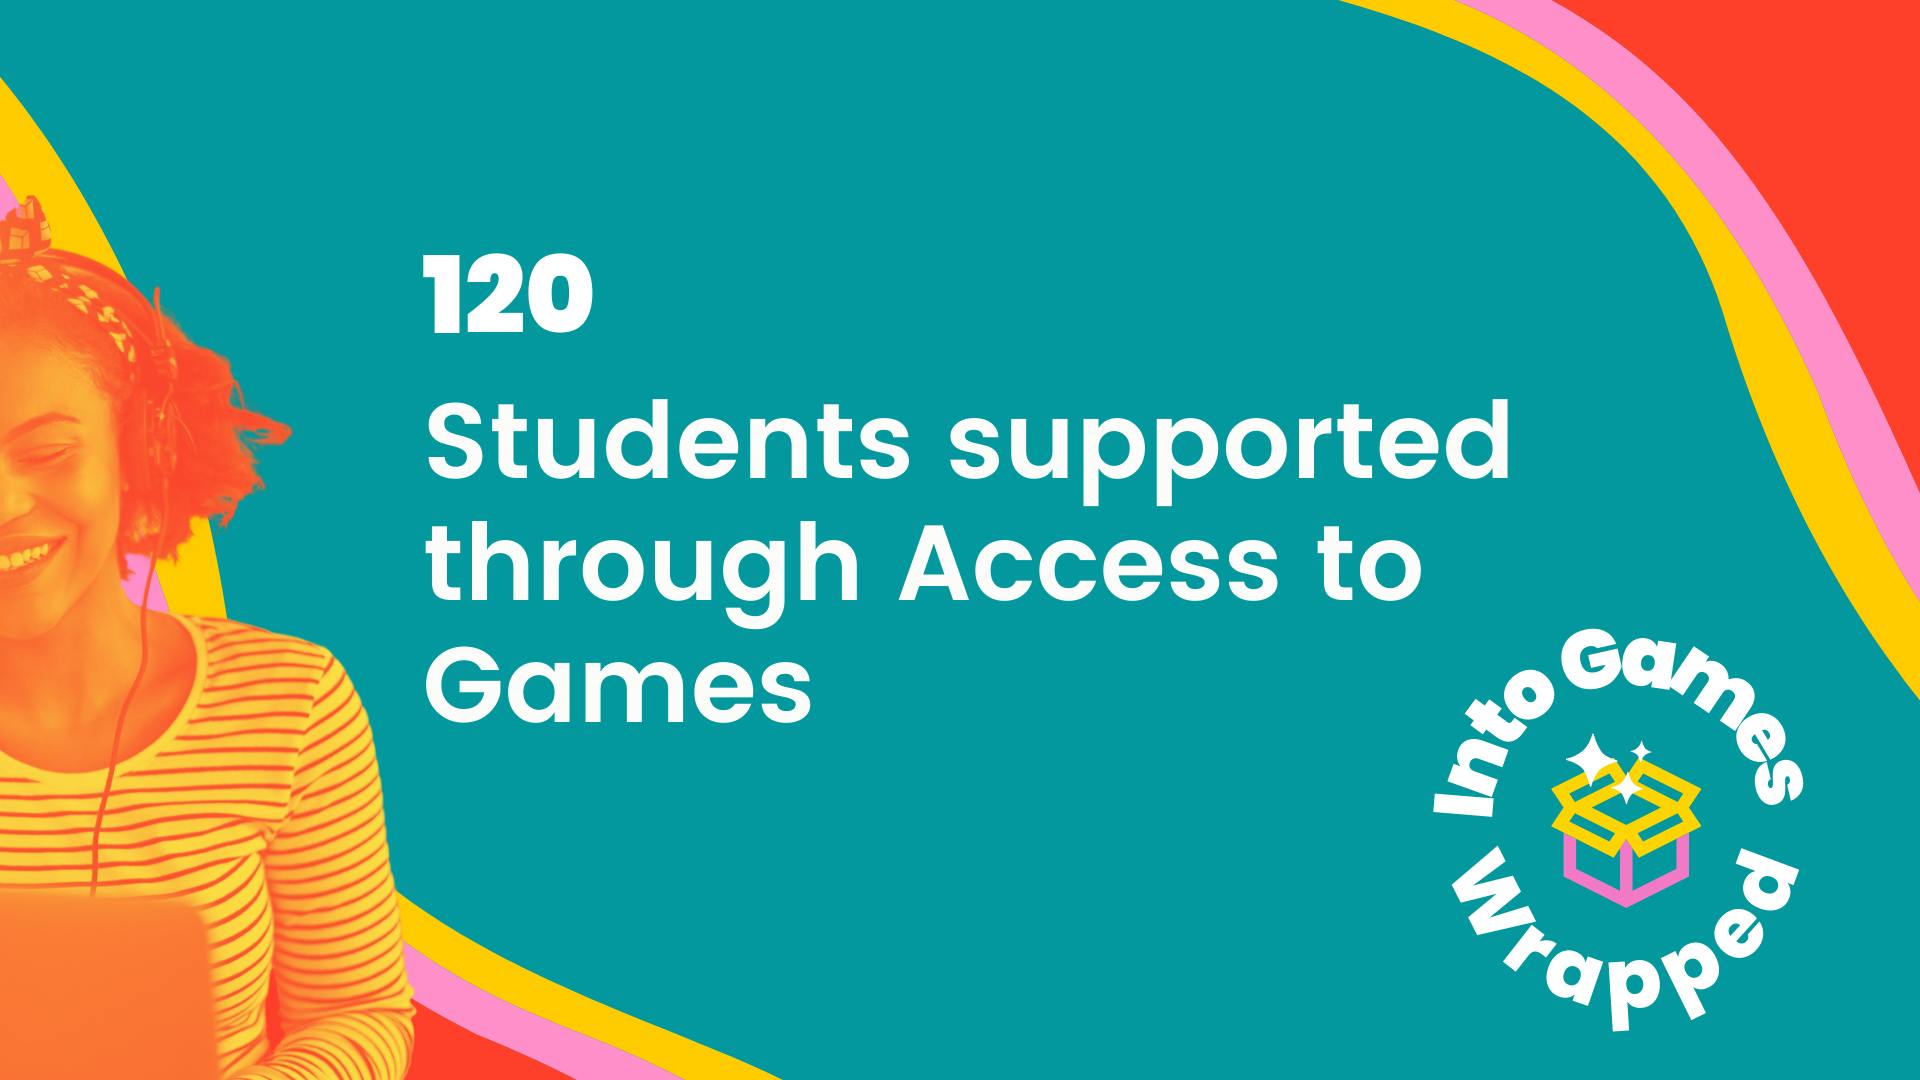 120 students supported through Access to Games